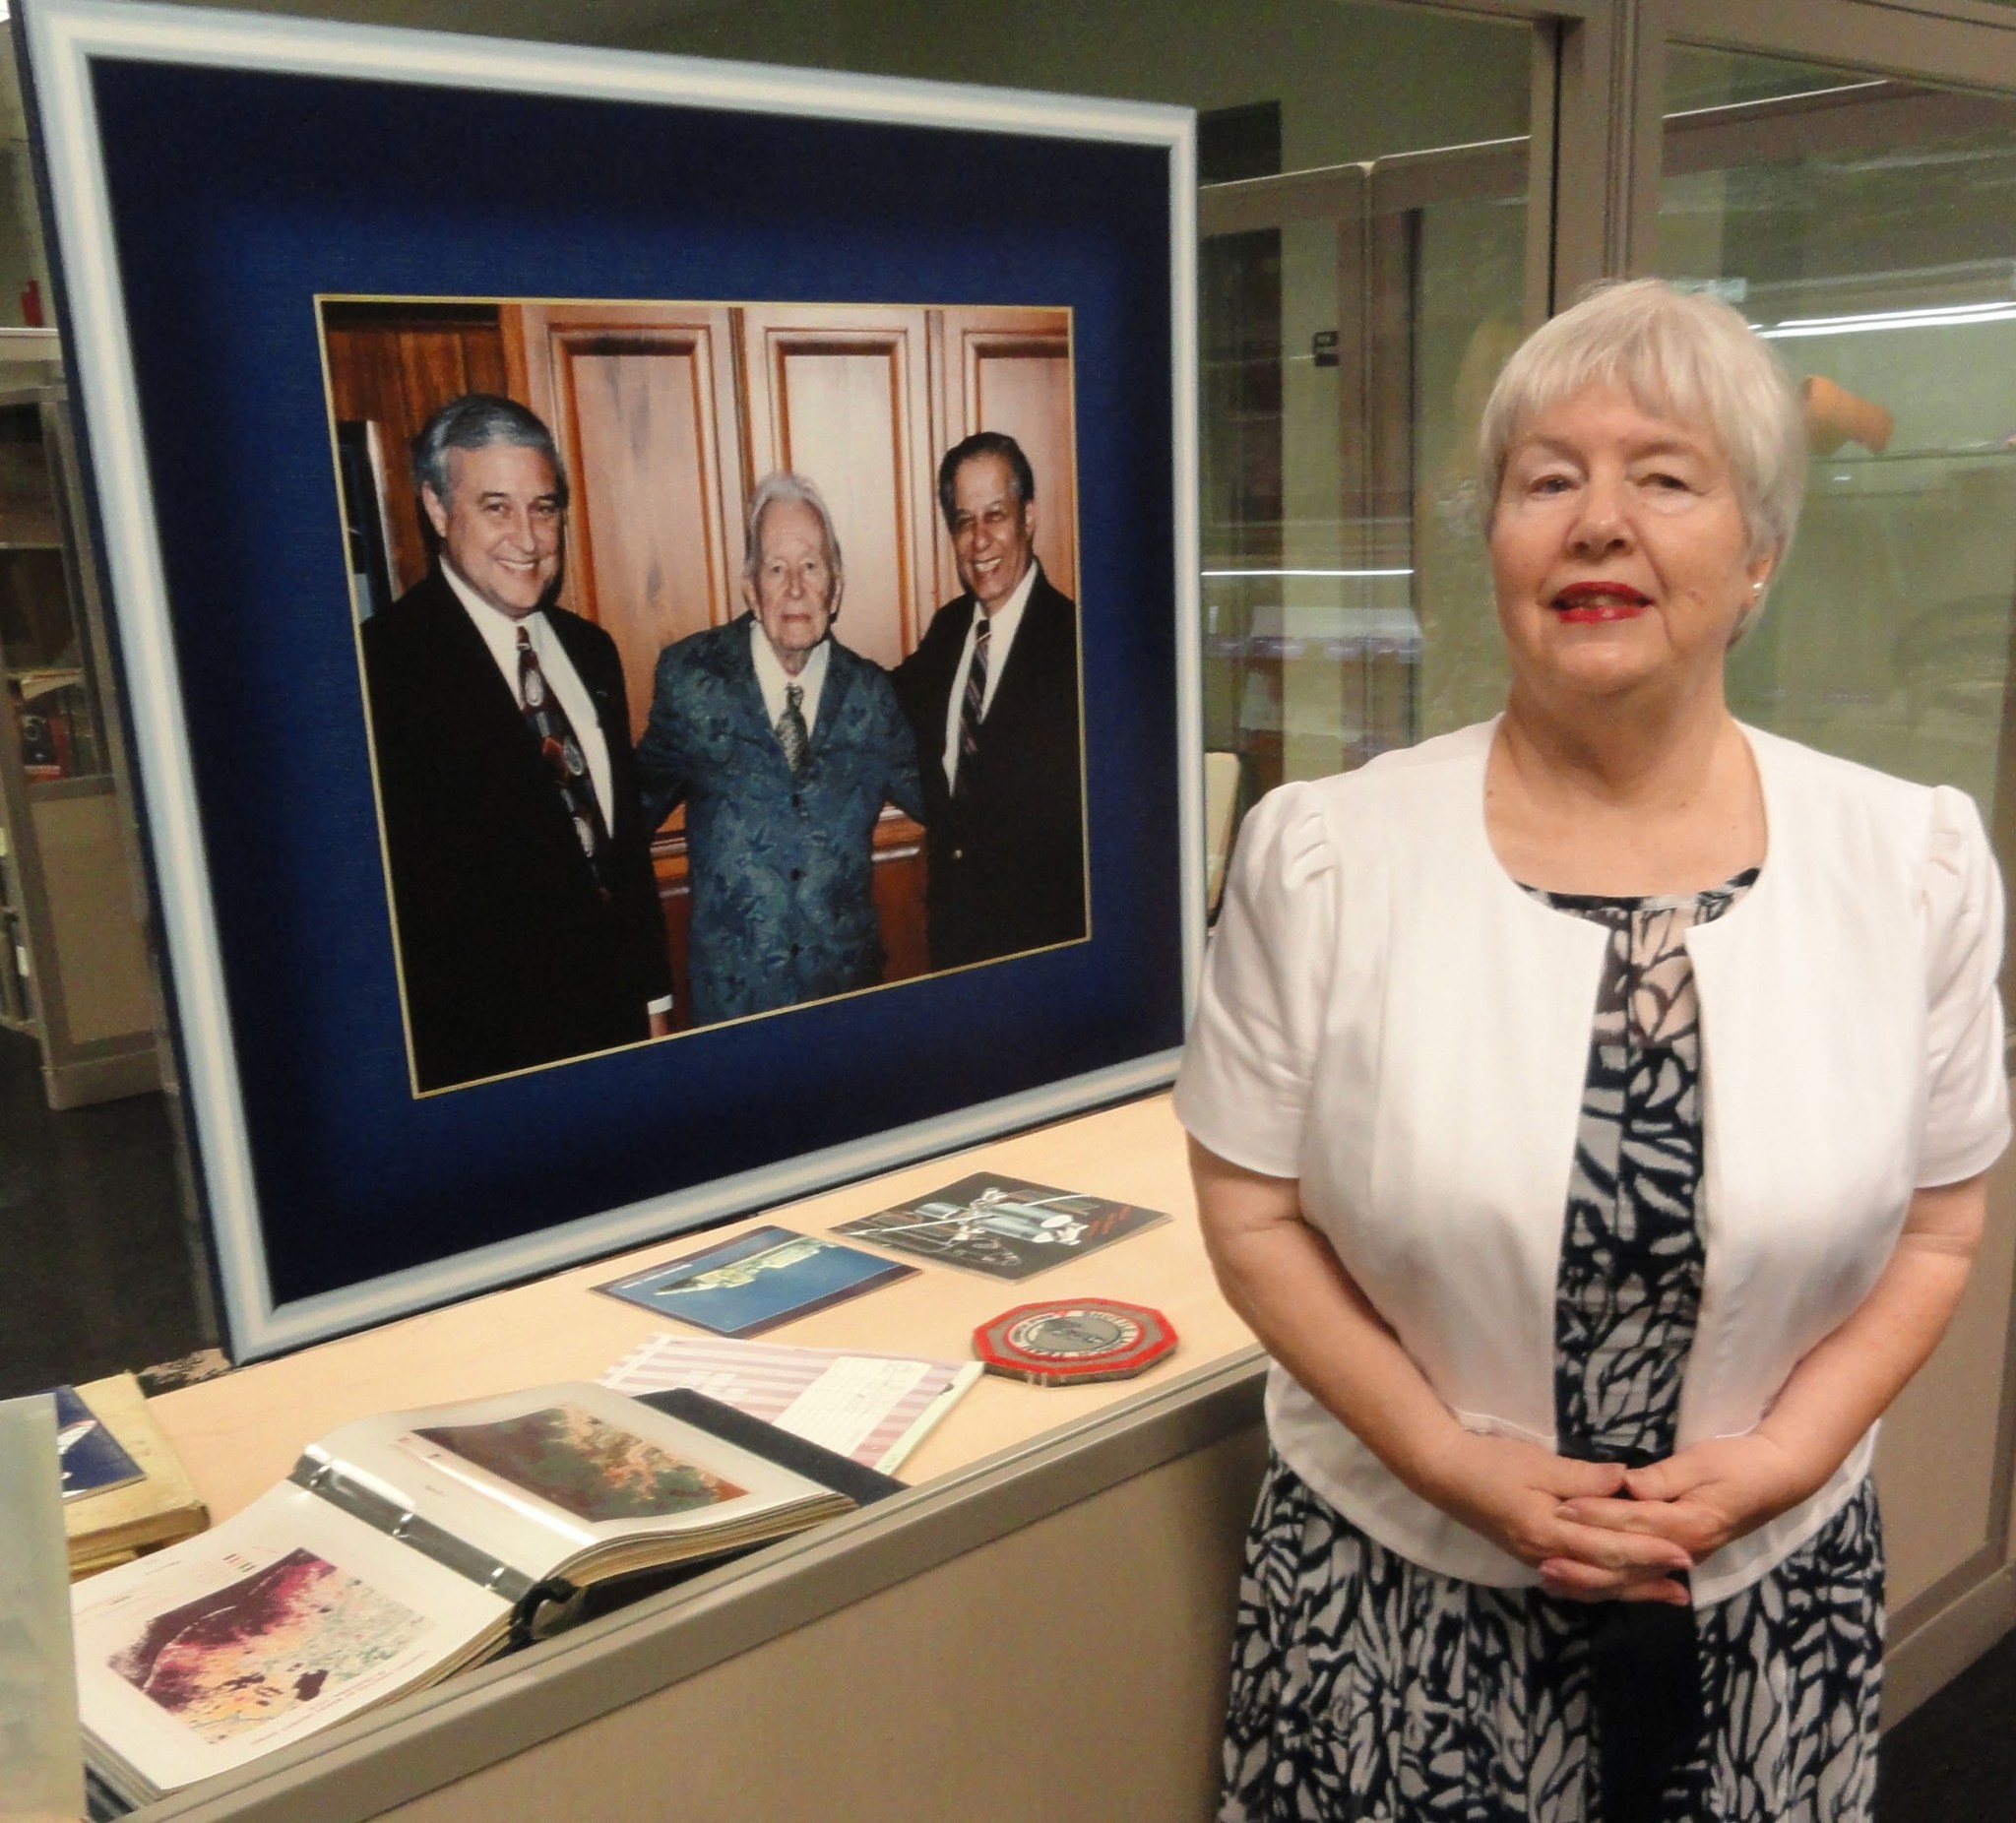 Wealtha Fortune Weaver of Ocean Springs stands next to a photo of her father, Capt. William C. Fortune